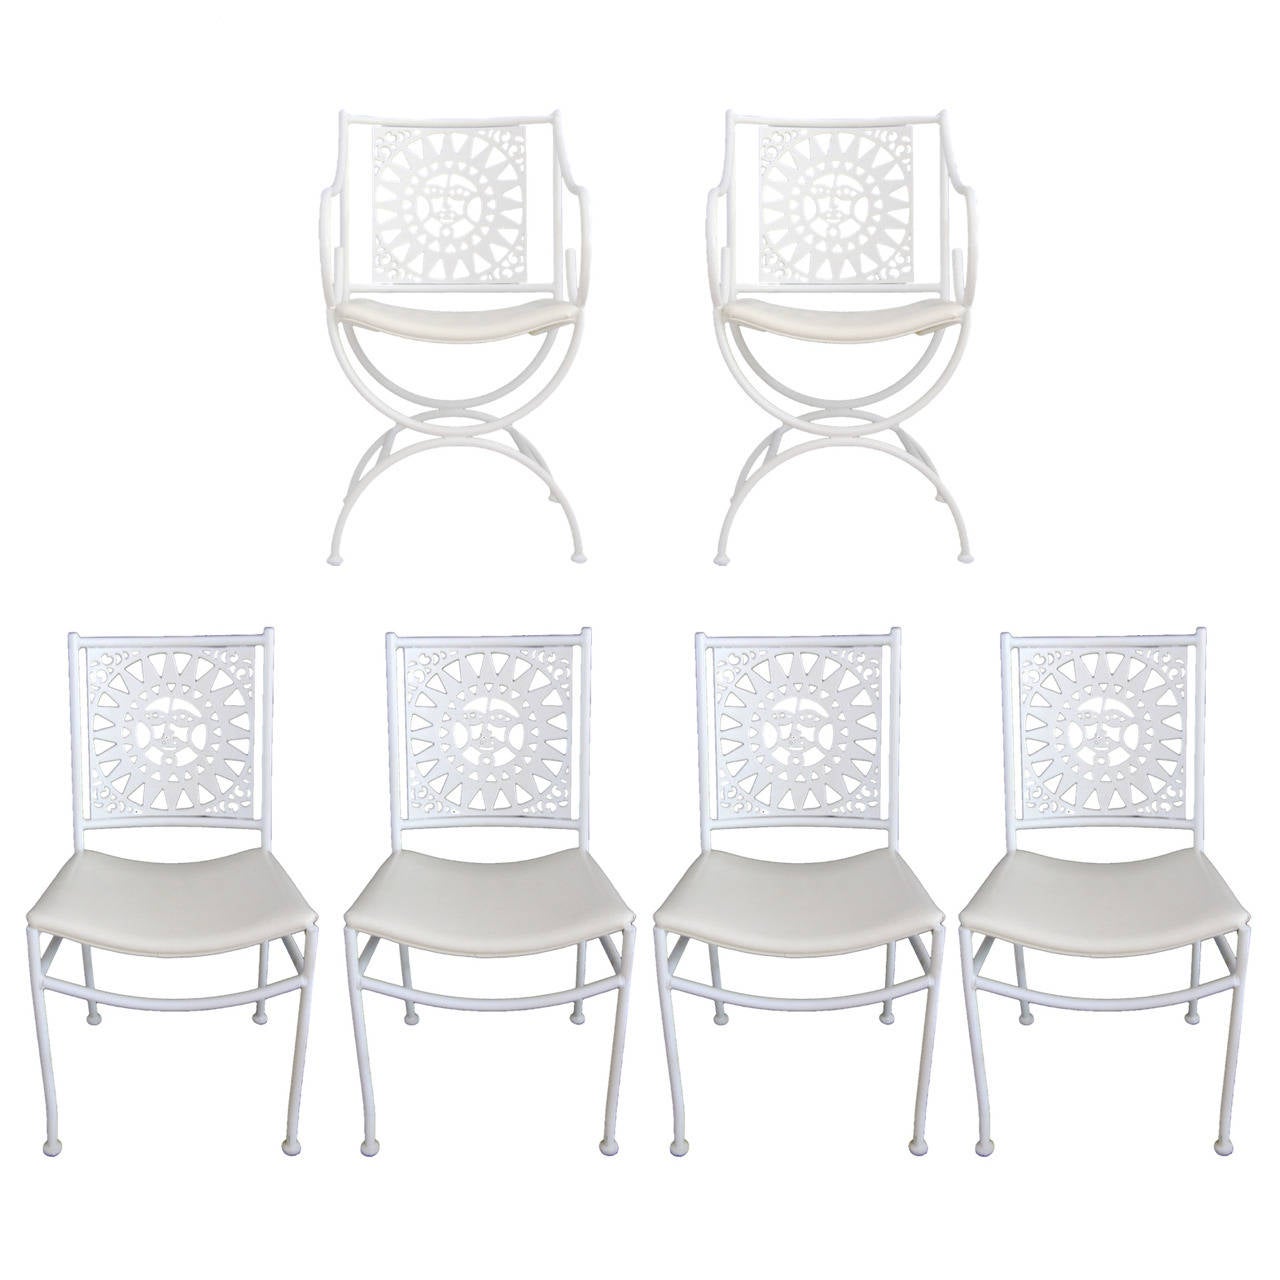 Unique white painted wrought iron table with whimsical sun cut-outs. 
Table measures: 66